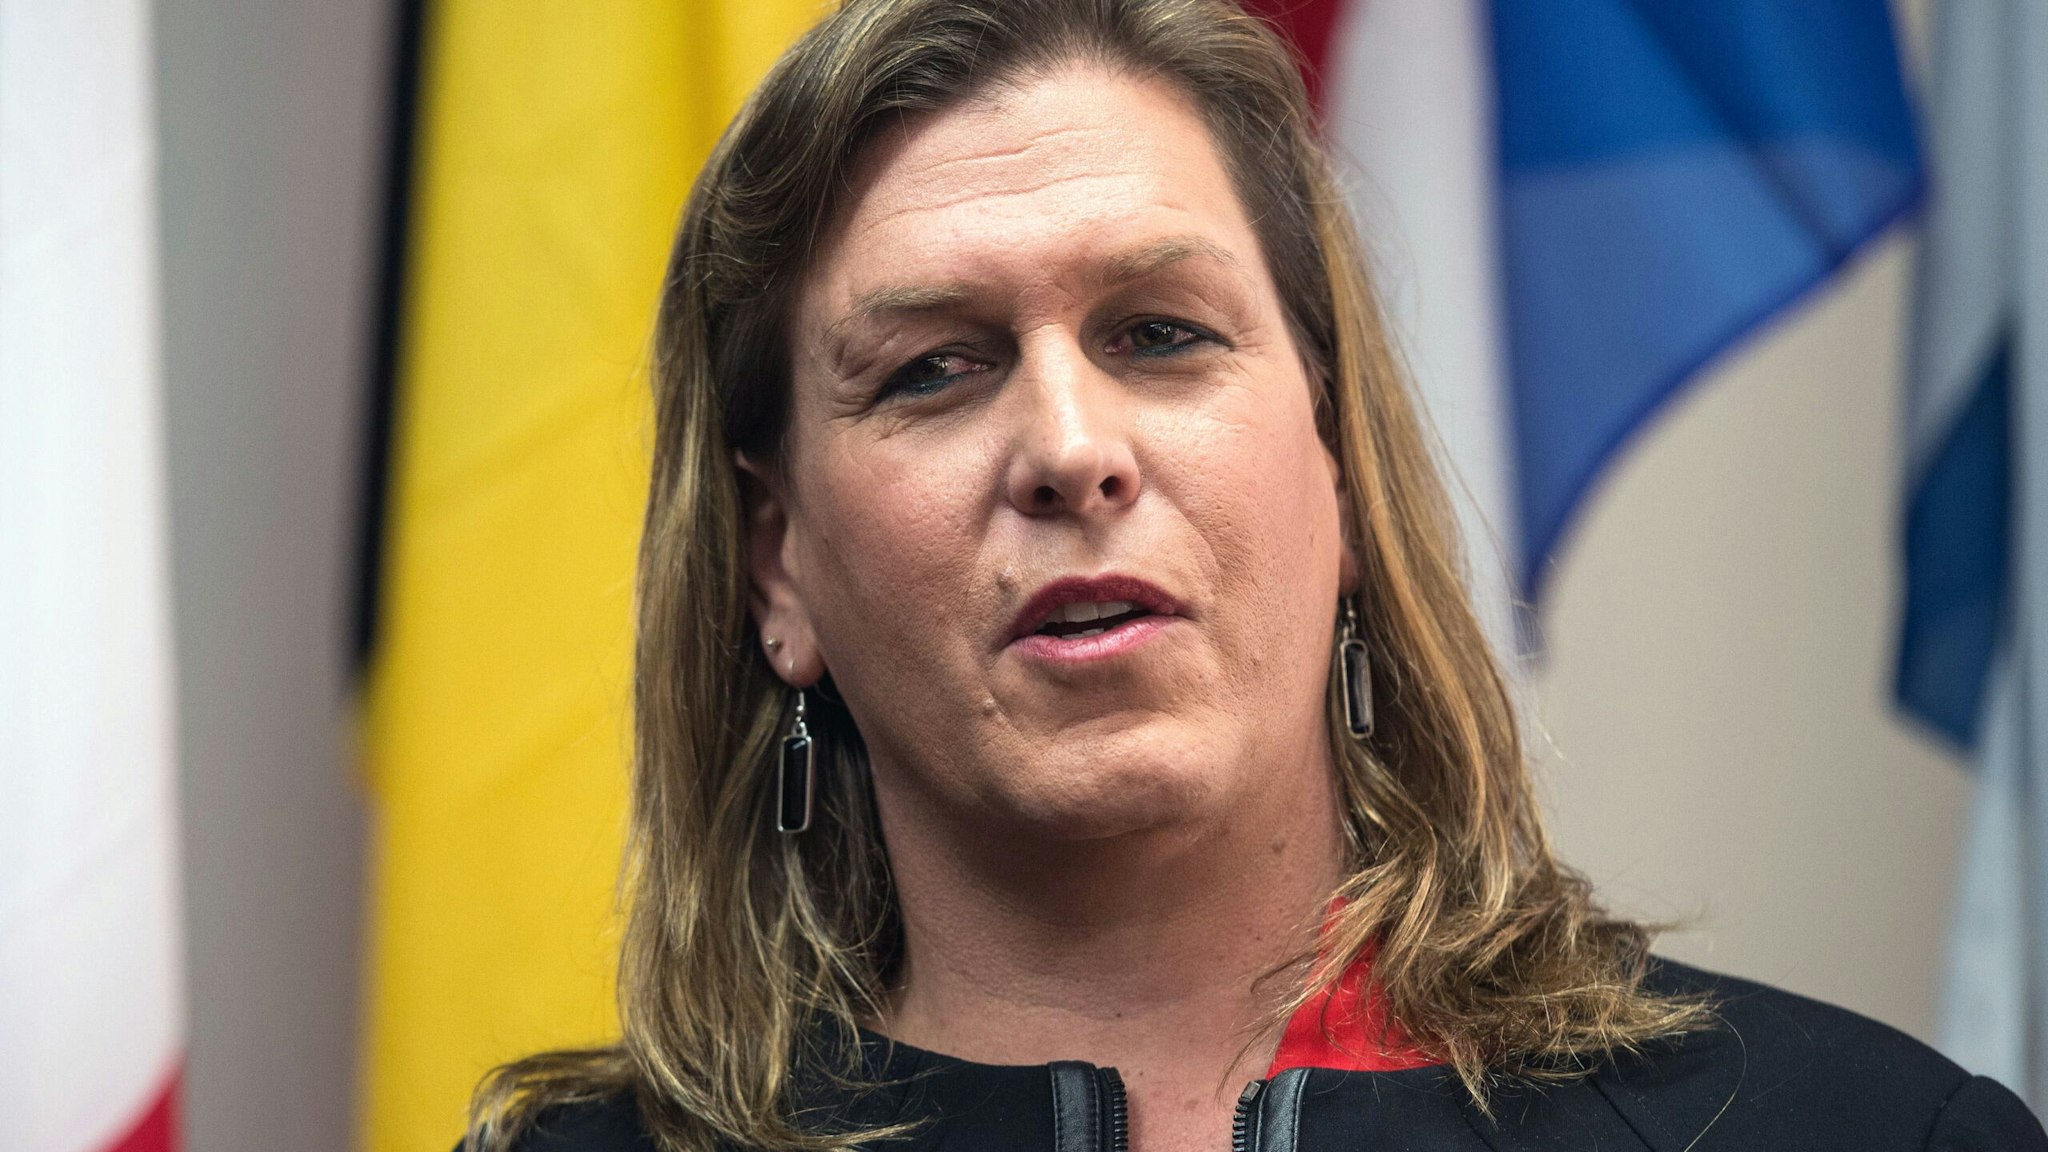 Transgender former US Navy Seal Senior Chief Kristin Beck speaks during a conference entitled "Perspectives on Transgender Military Service from Around the Globe" organized by the American Civil Liberties Union (ACLU) and the Palm Center in Washington on October 20, 2014. Transgender military personnel from 18 countries who allow them to serve openly, gathered to talk about their experiences and discuss whether the US military could join them.